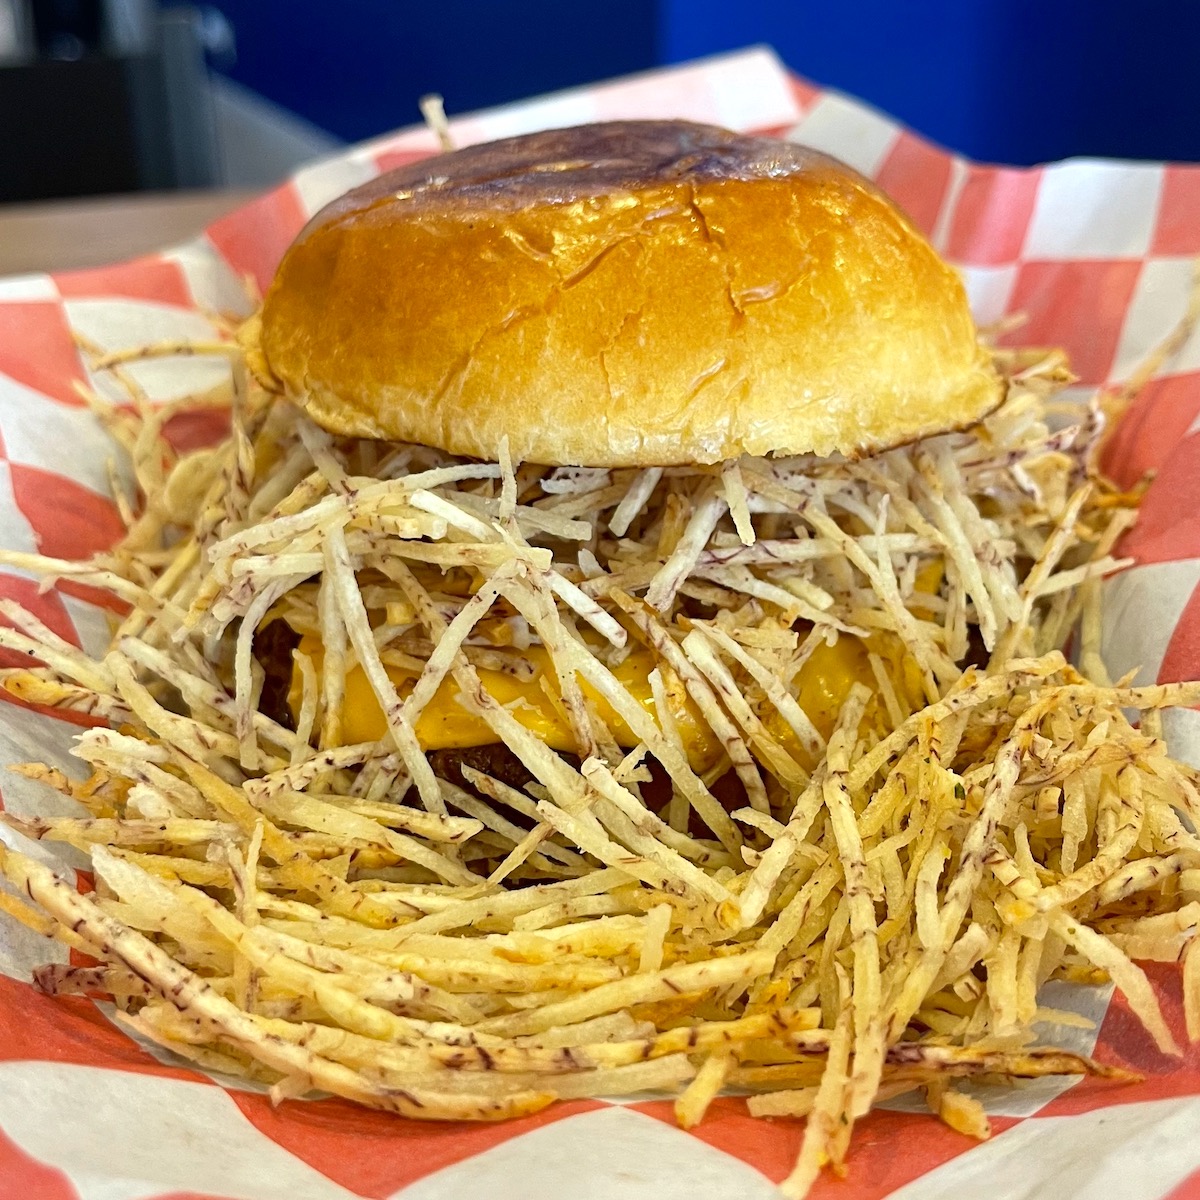 Frita Cubana from Cuento Sandwiches in Doral, Florida